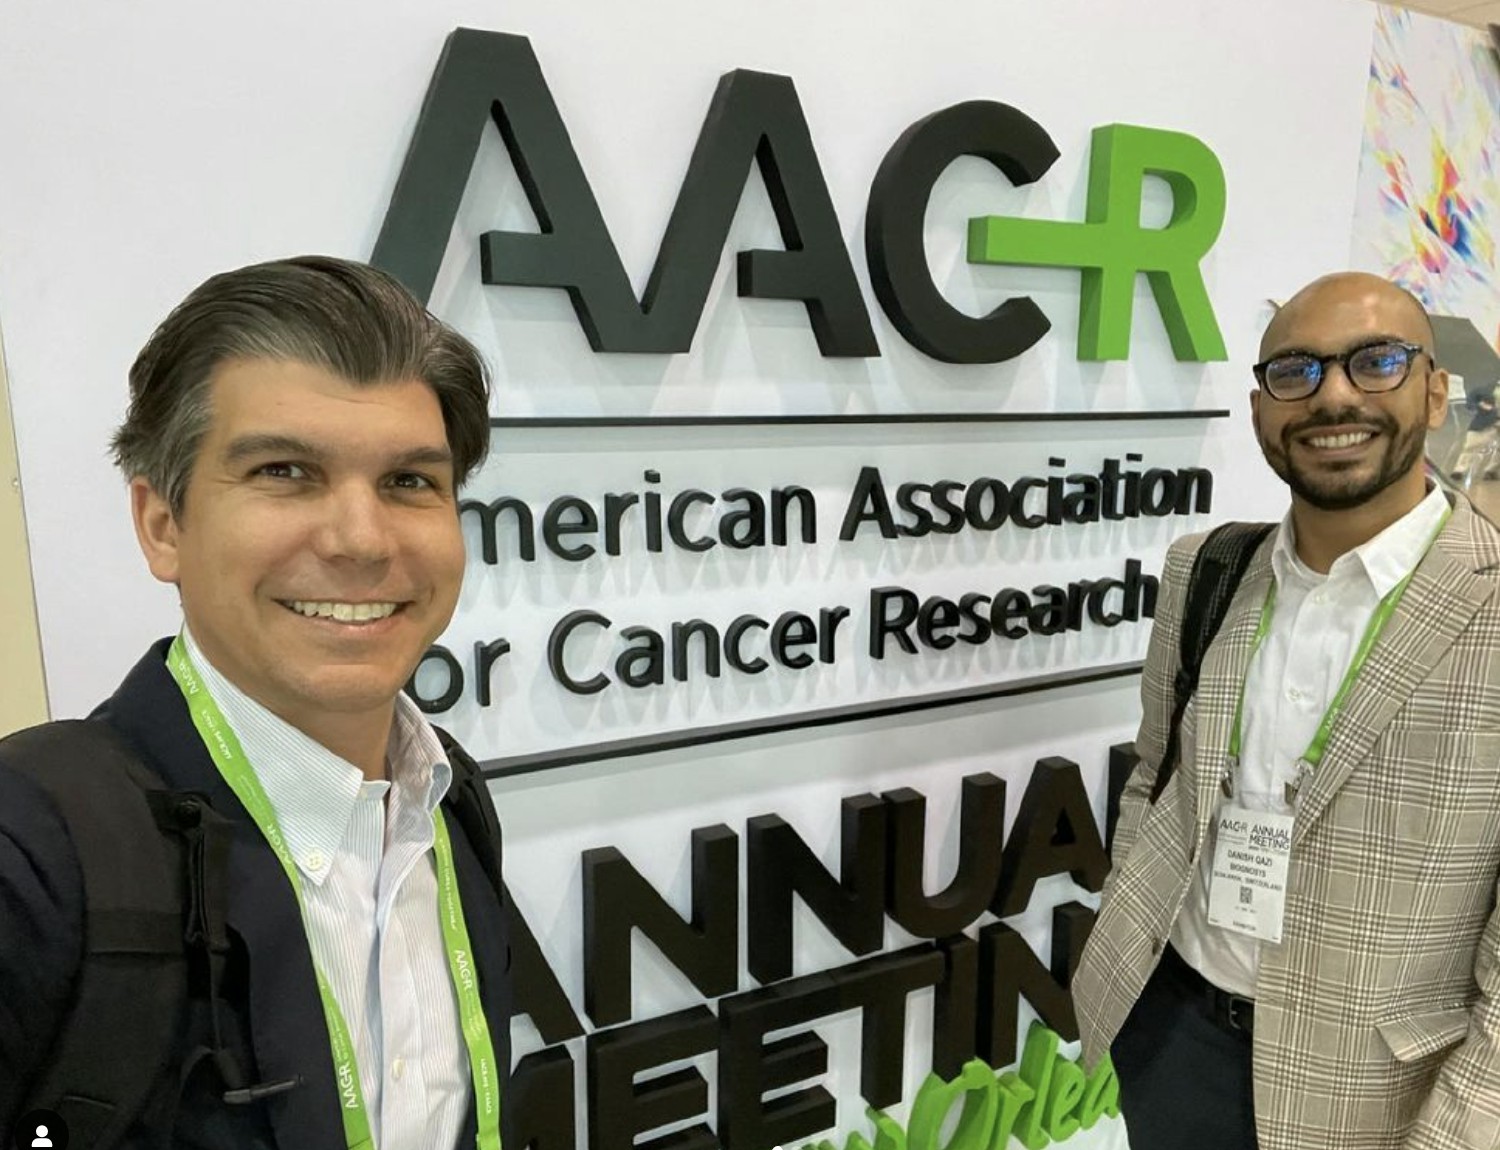 Visiting some of our clients at the American Association for Cancer Research Annual Meeting